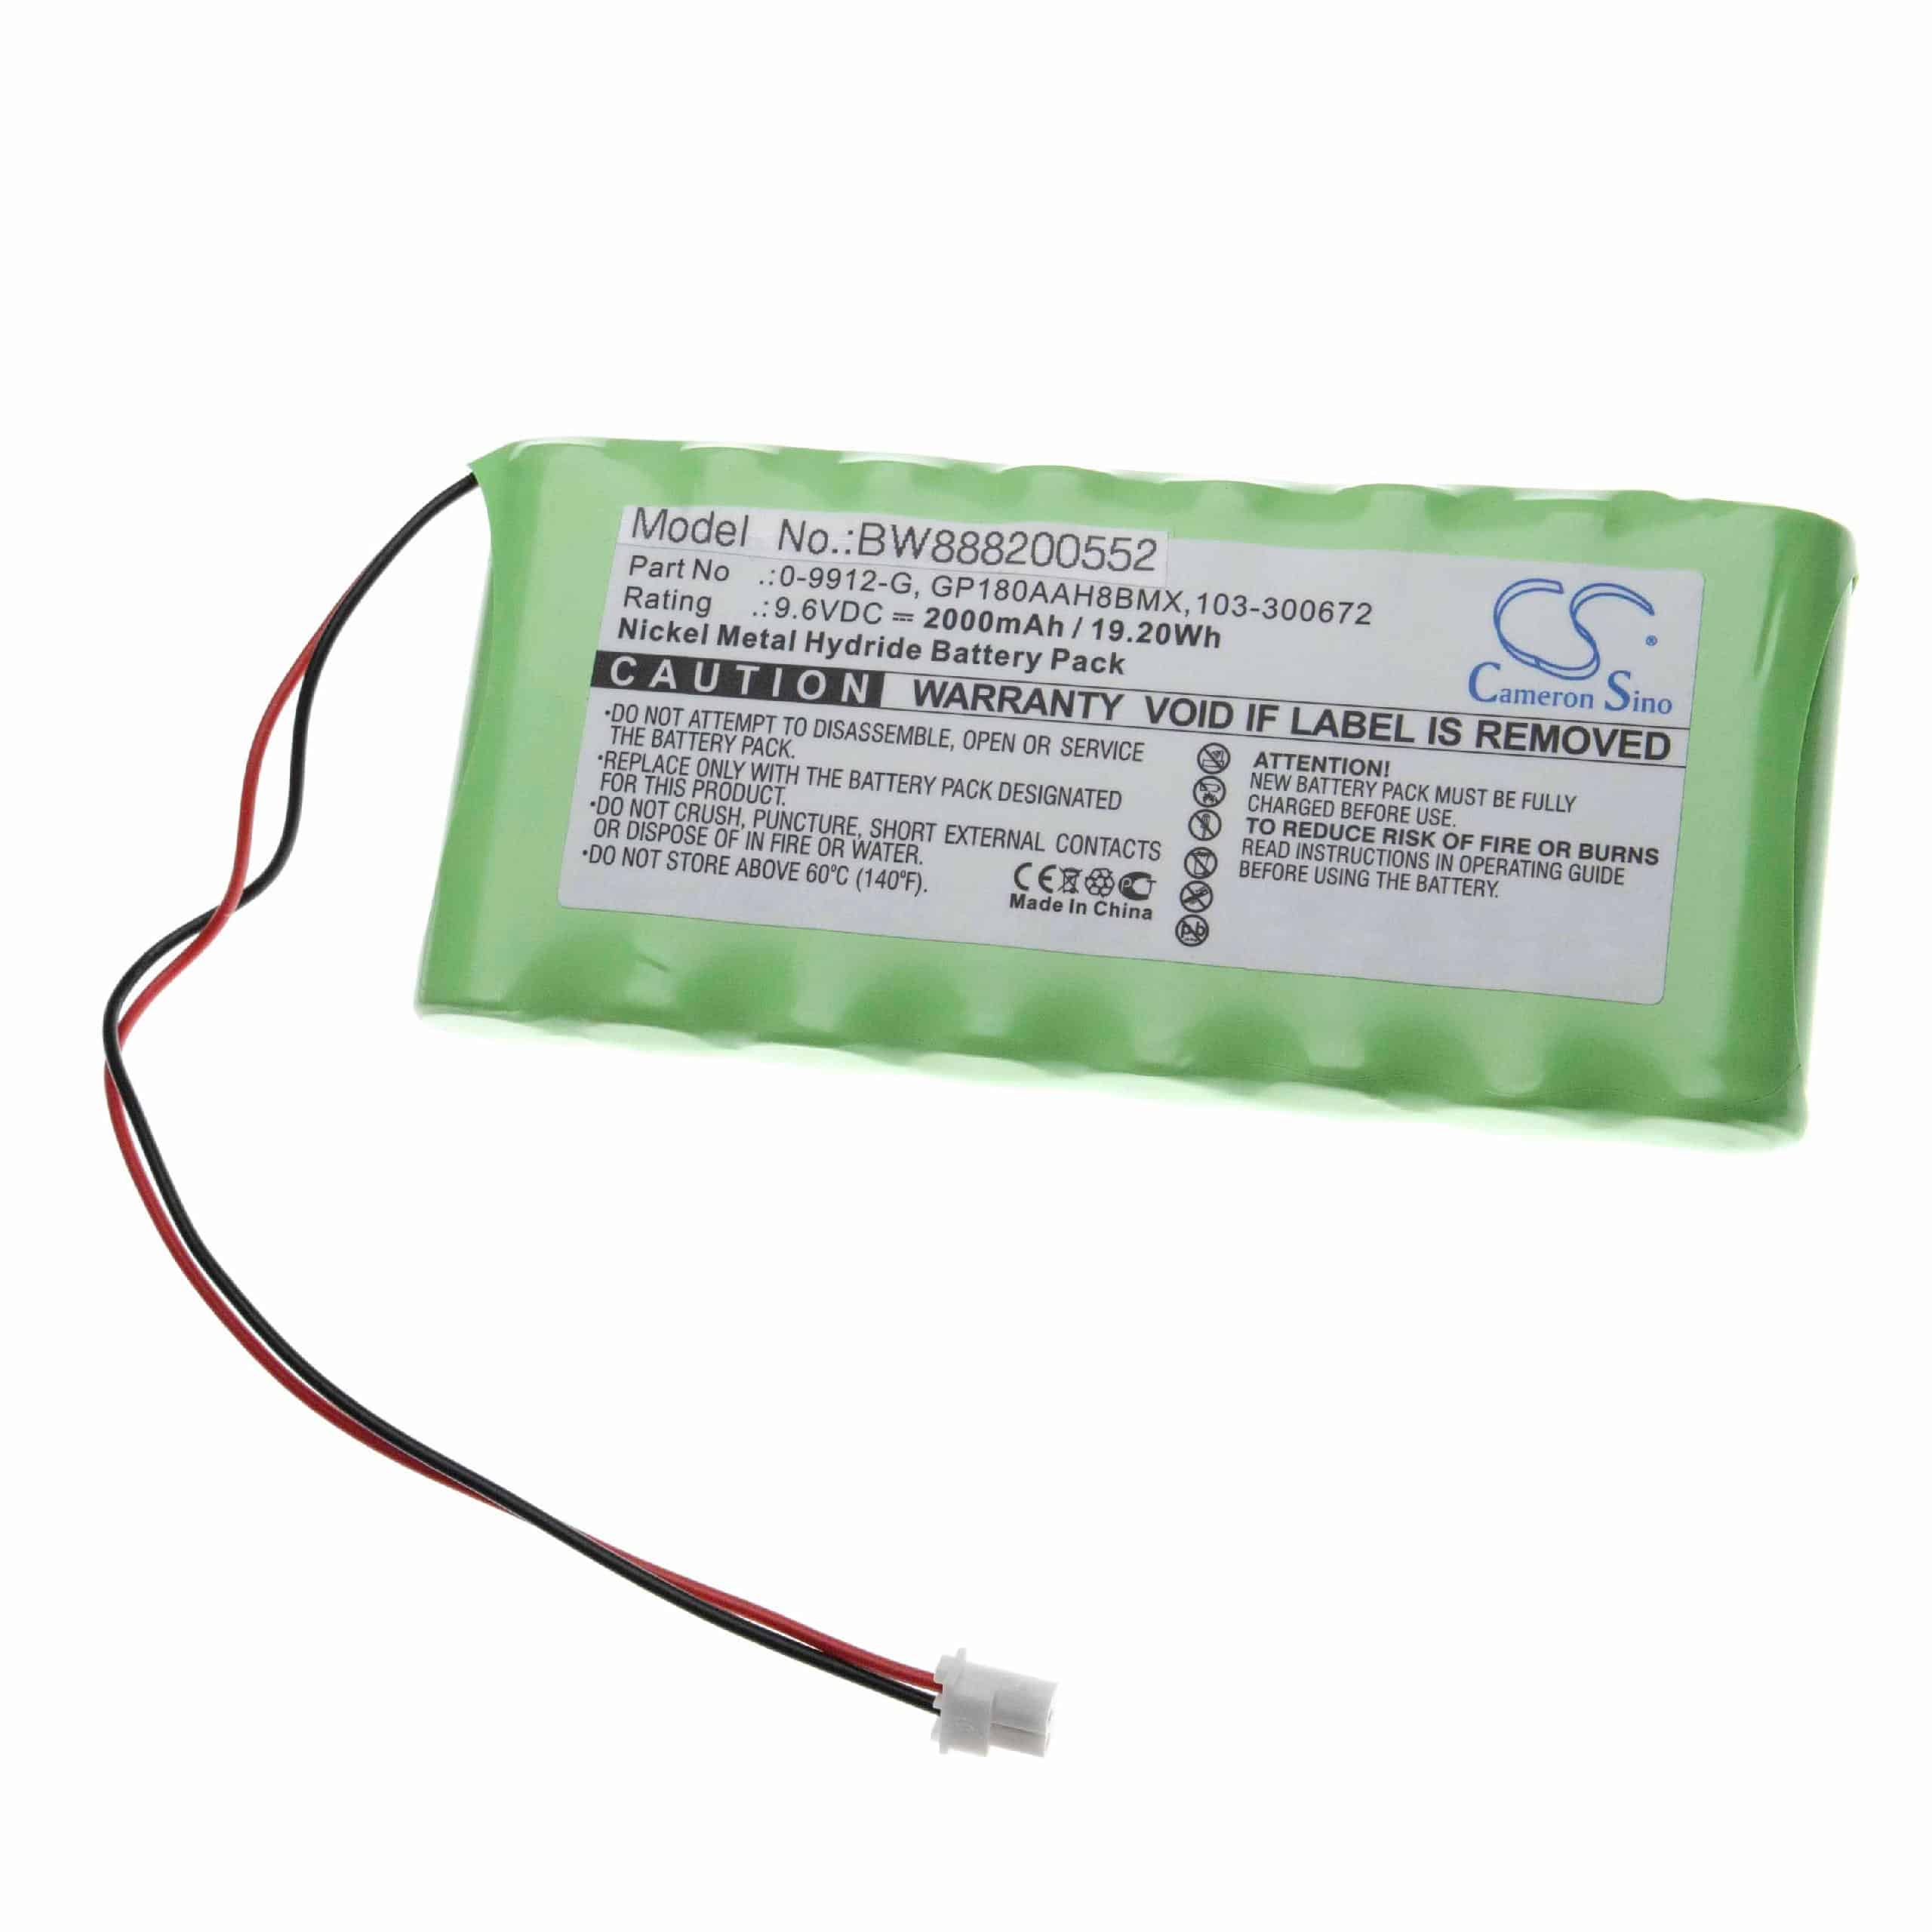 Alarm System Battery Replacement for Visonic GP180AAH8BMX, 103-300672, 0-9912-G - 2000mAh 9.6V NiMH